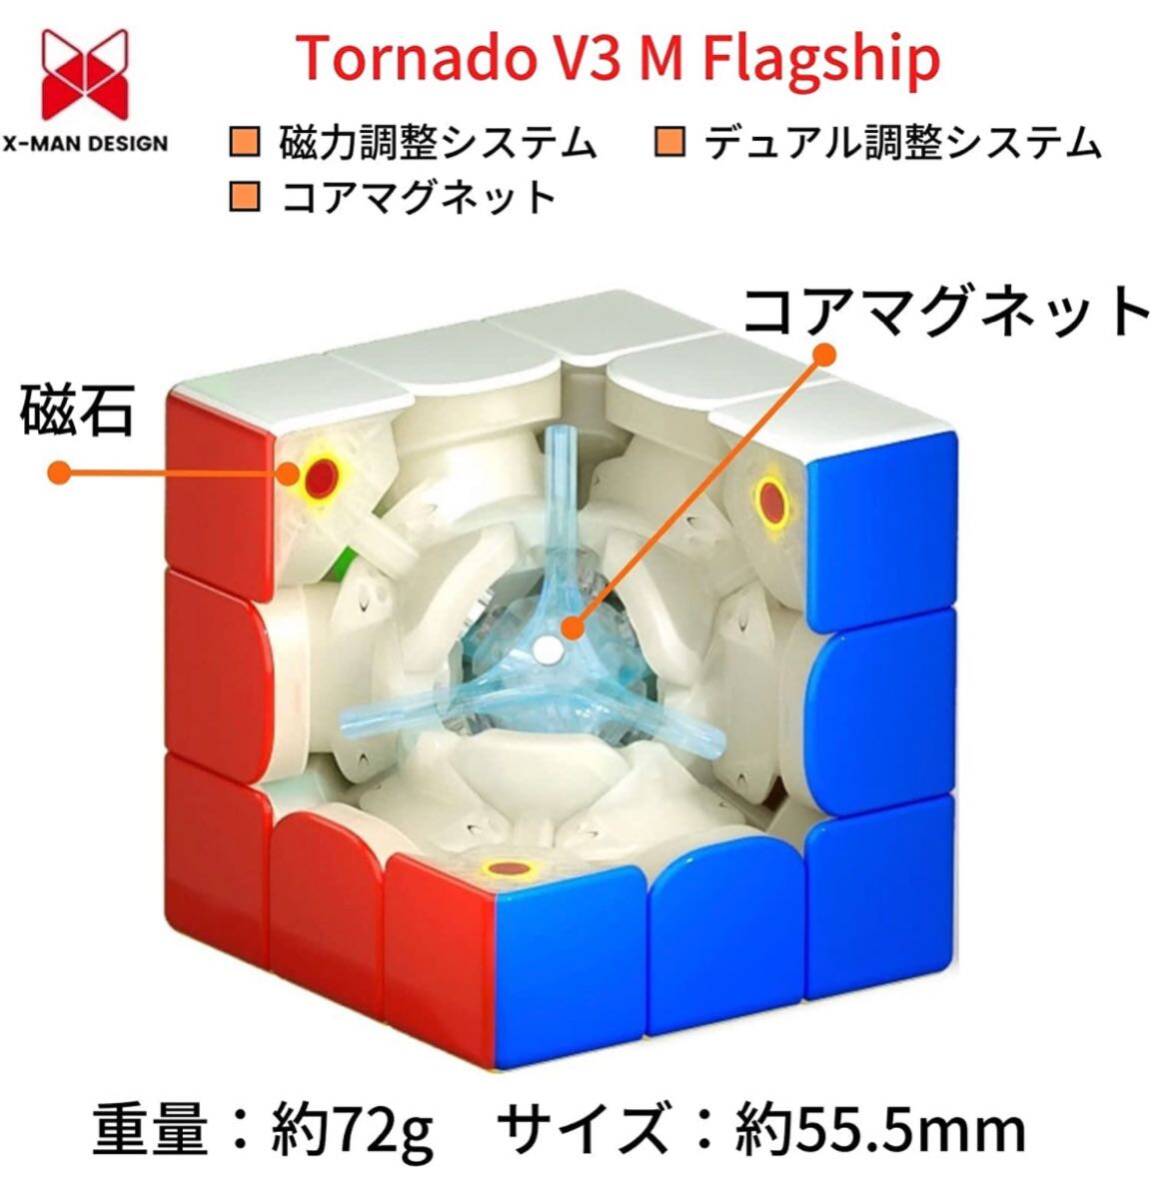  new goods for competition XMD Tornado V3 Flagship Rubik's Cube magnet installing sticker less Speed Cube 